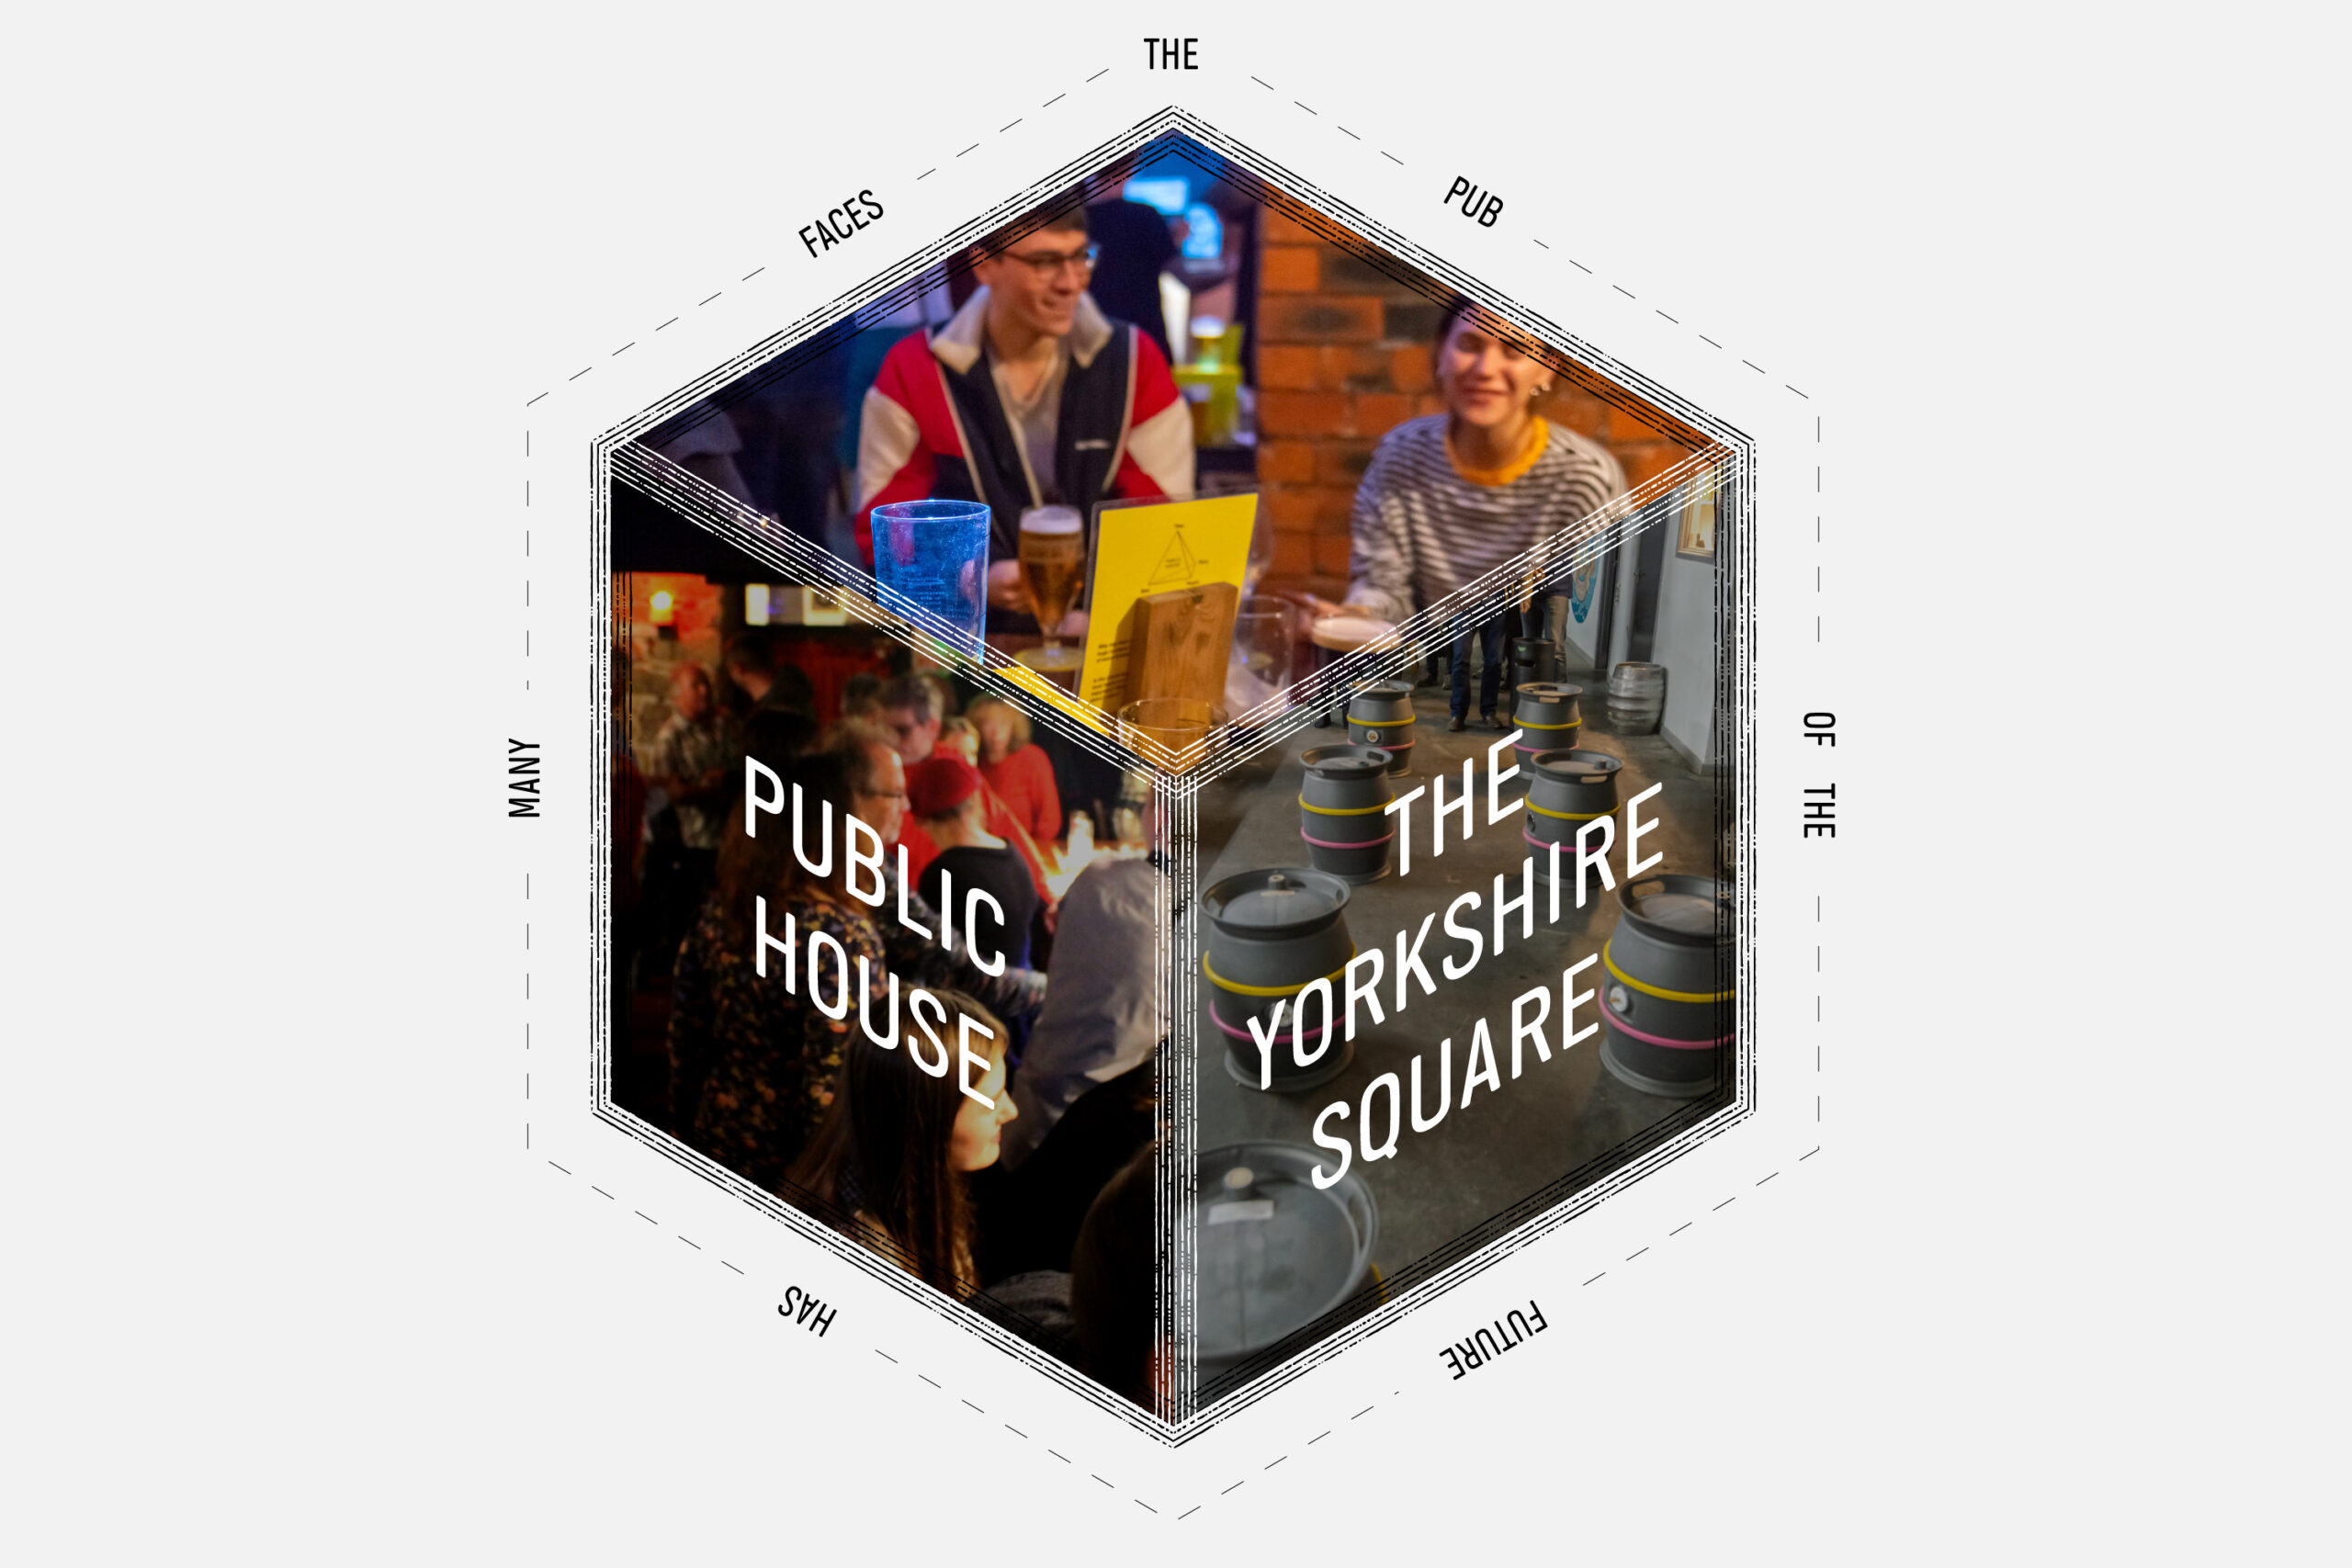 Dates Announced for Public House – The Yorkshire Square!